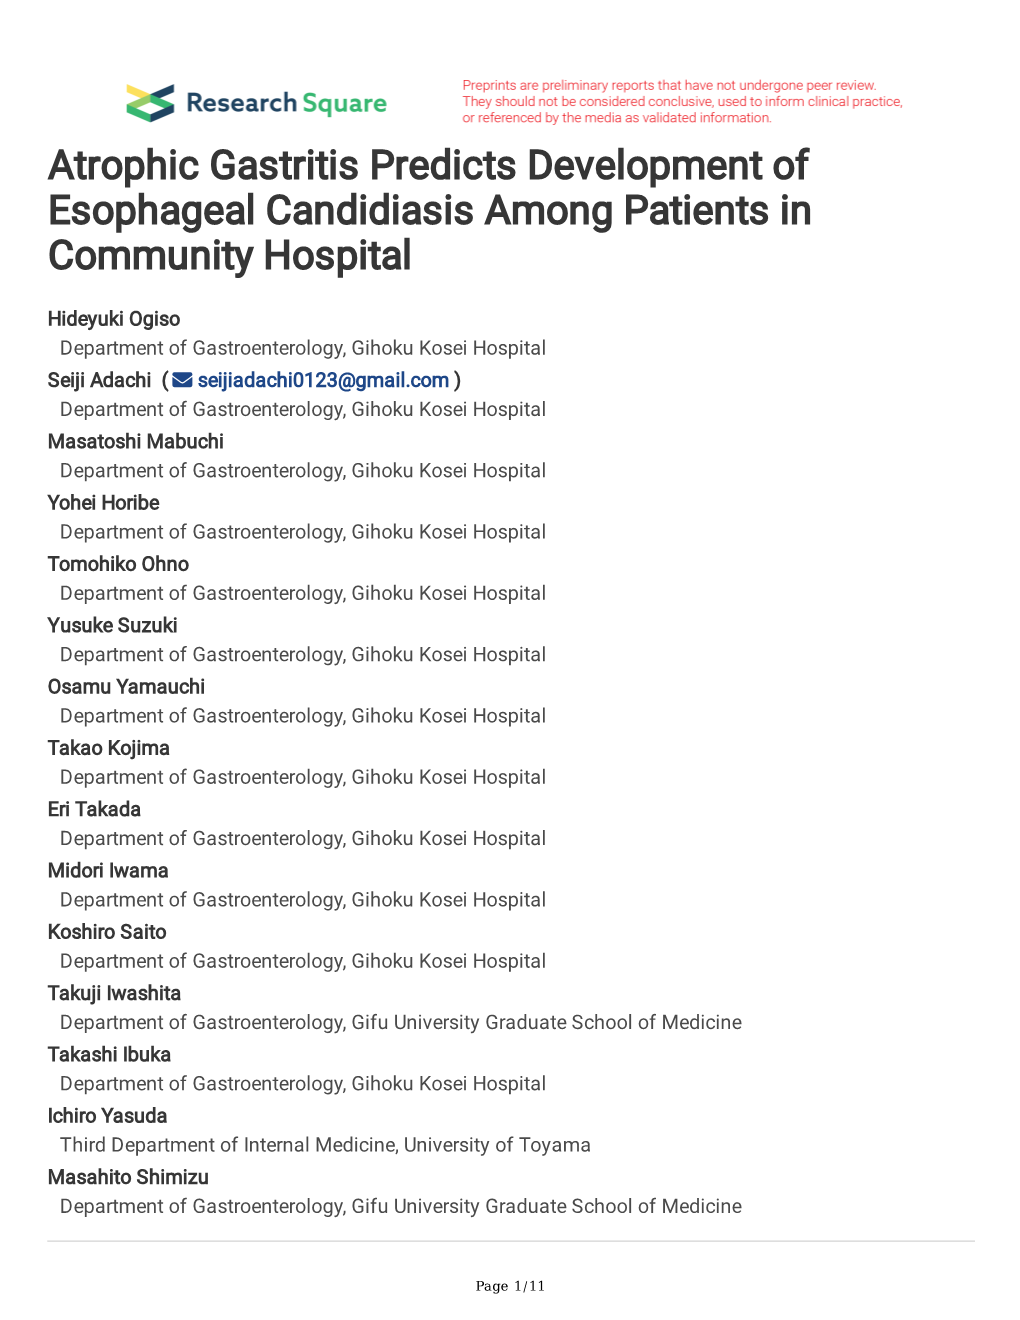 Atrophic Gastritis Predicts Development of Esophageal Candidiasis Among Patients in Community Hospital